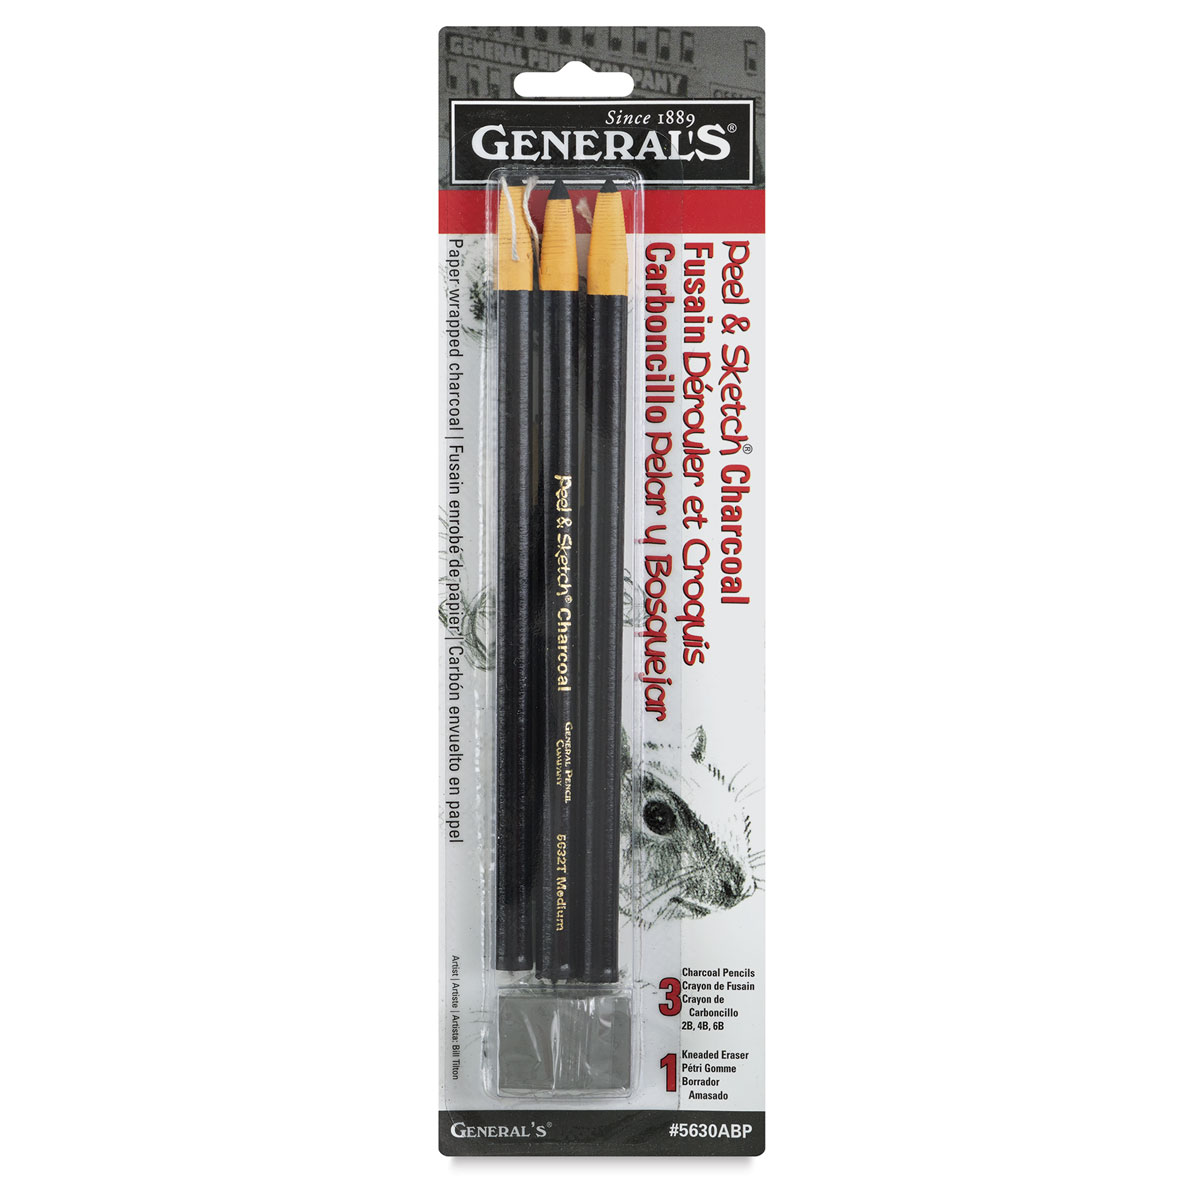 General's Peel and Sketch Charcoal Pencils and Sets